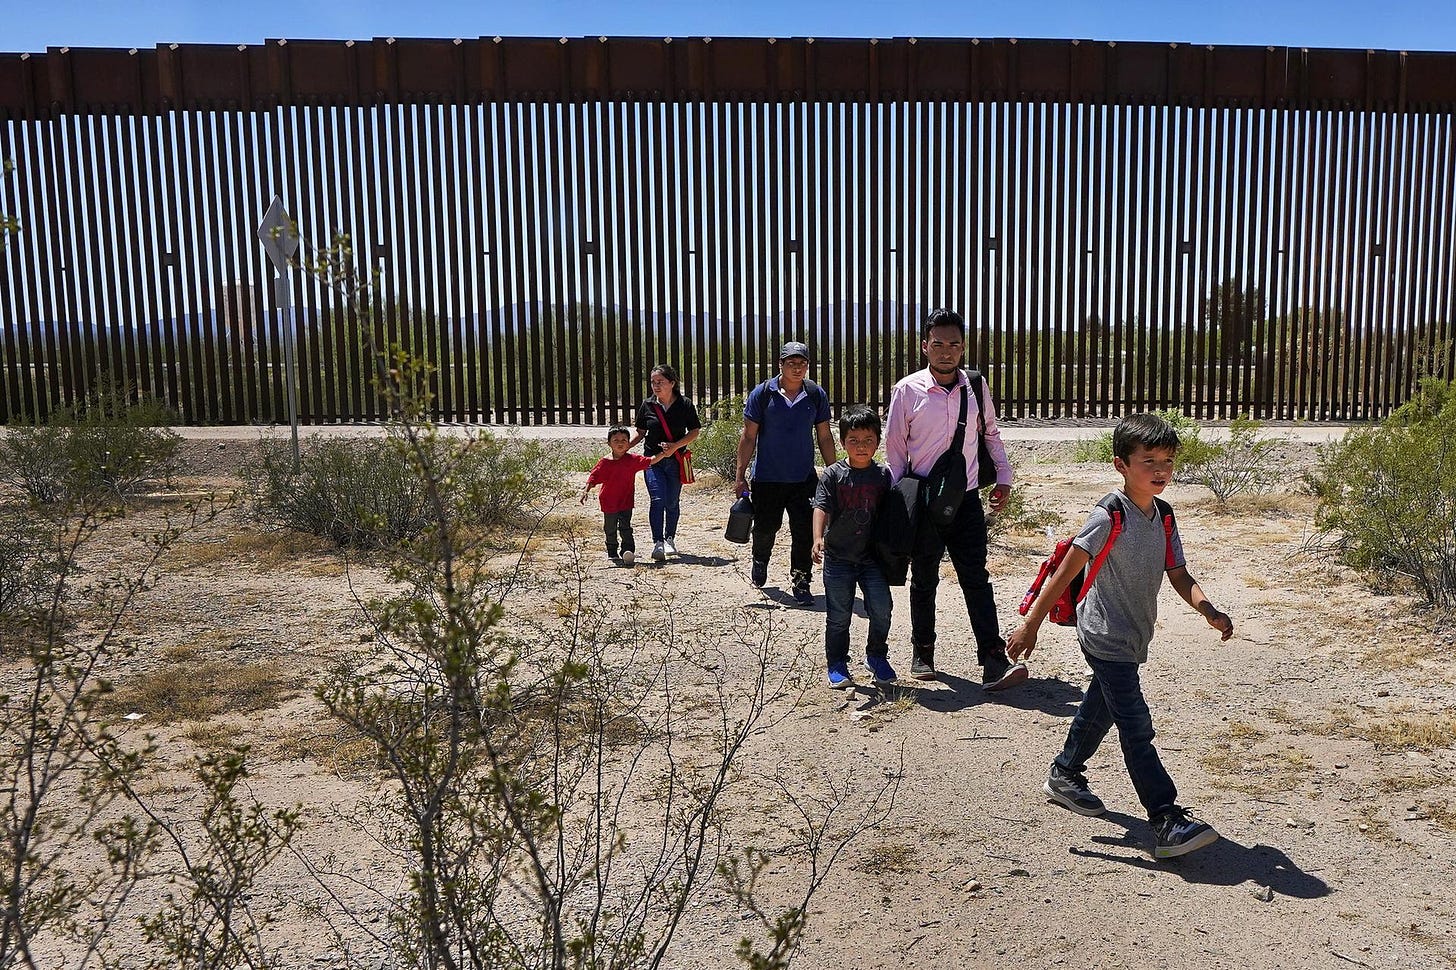 A family of five and a man walk through the desert after crossing the border near Lukeville, Ariz.